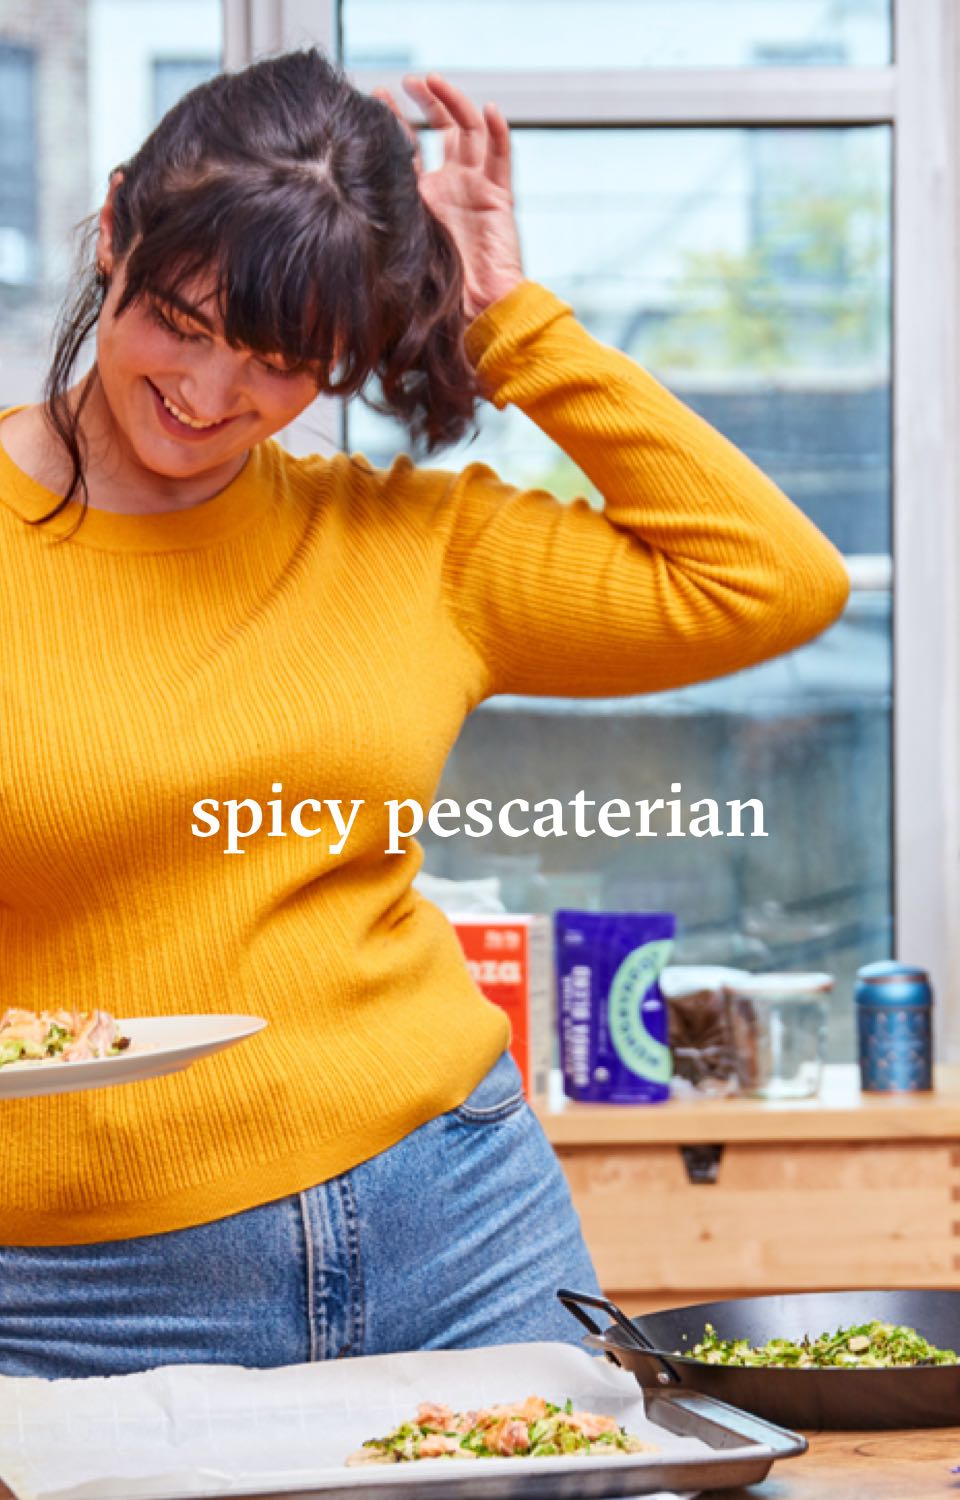 Woman in kitchen eating food. Headline reads Spicy Pescaterian